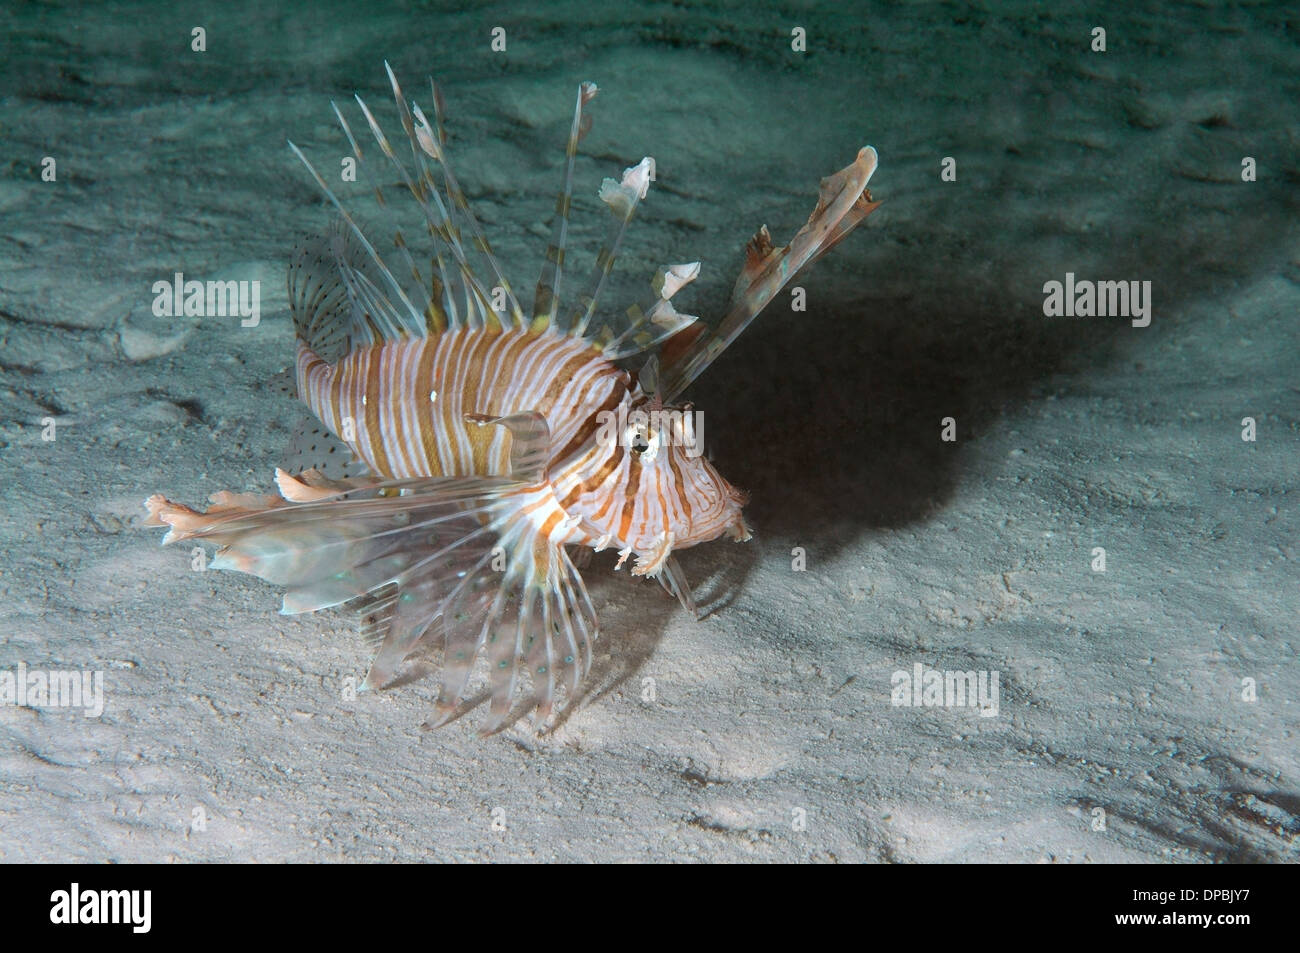 Red lionfish (Pterois volitans) in night diving. Red Sea, Egypt, Africa Stock Photo